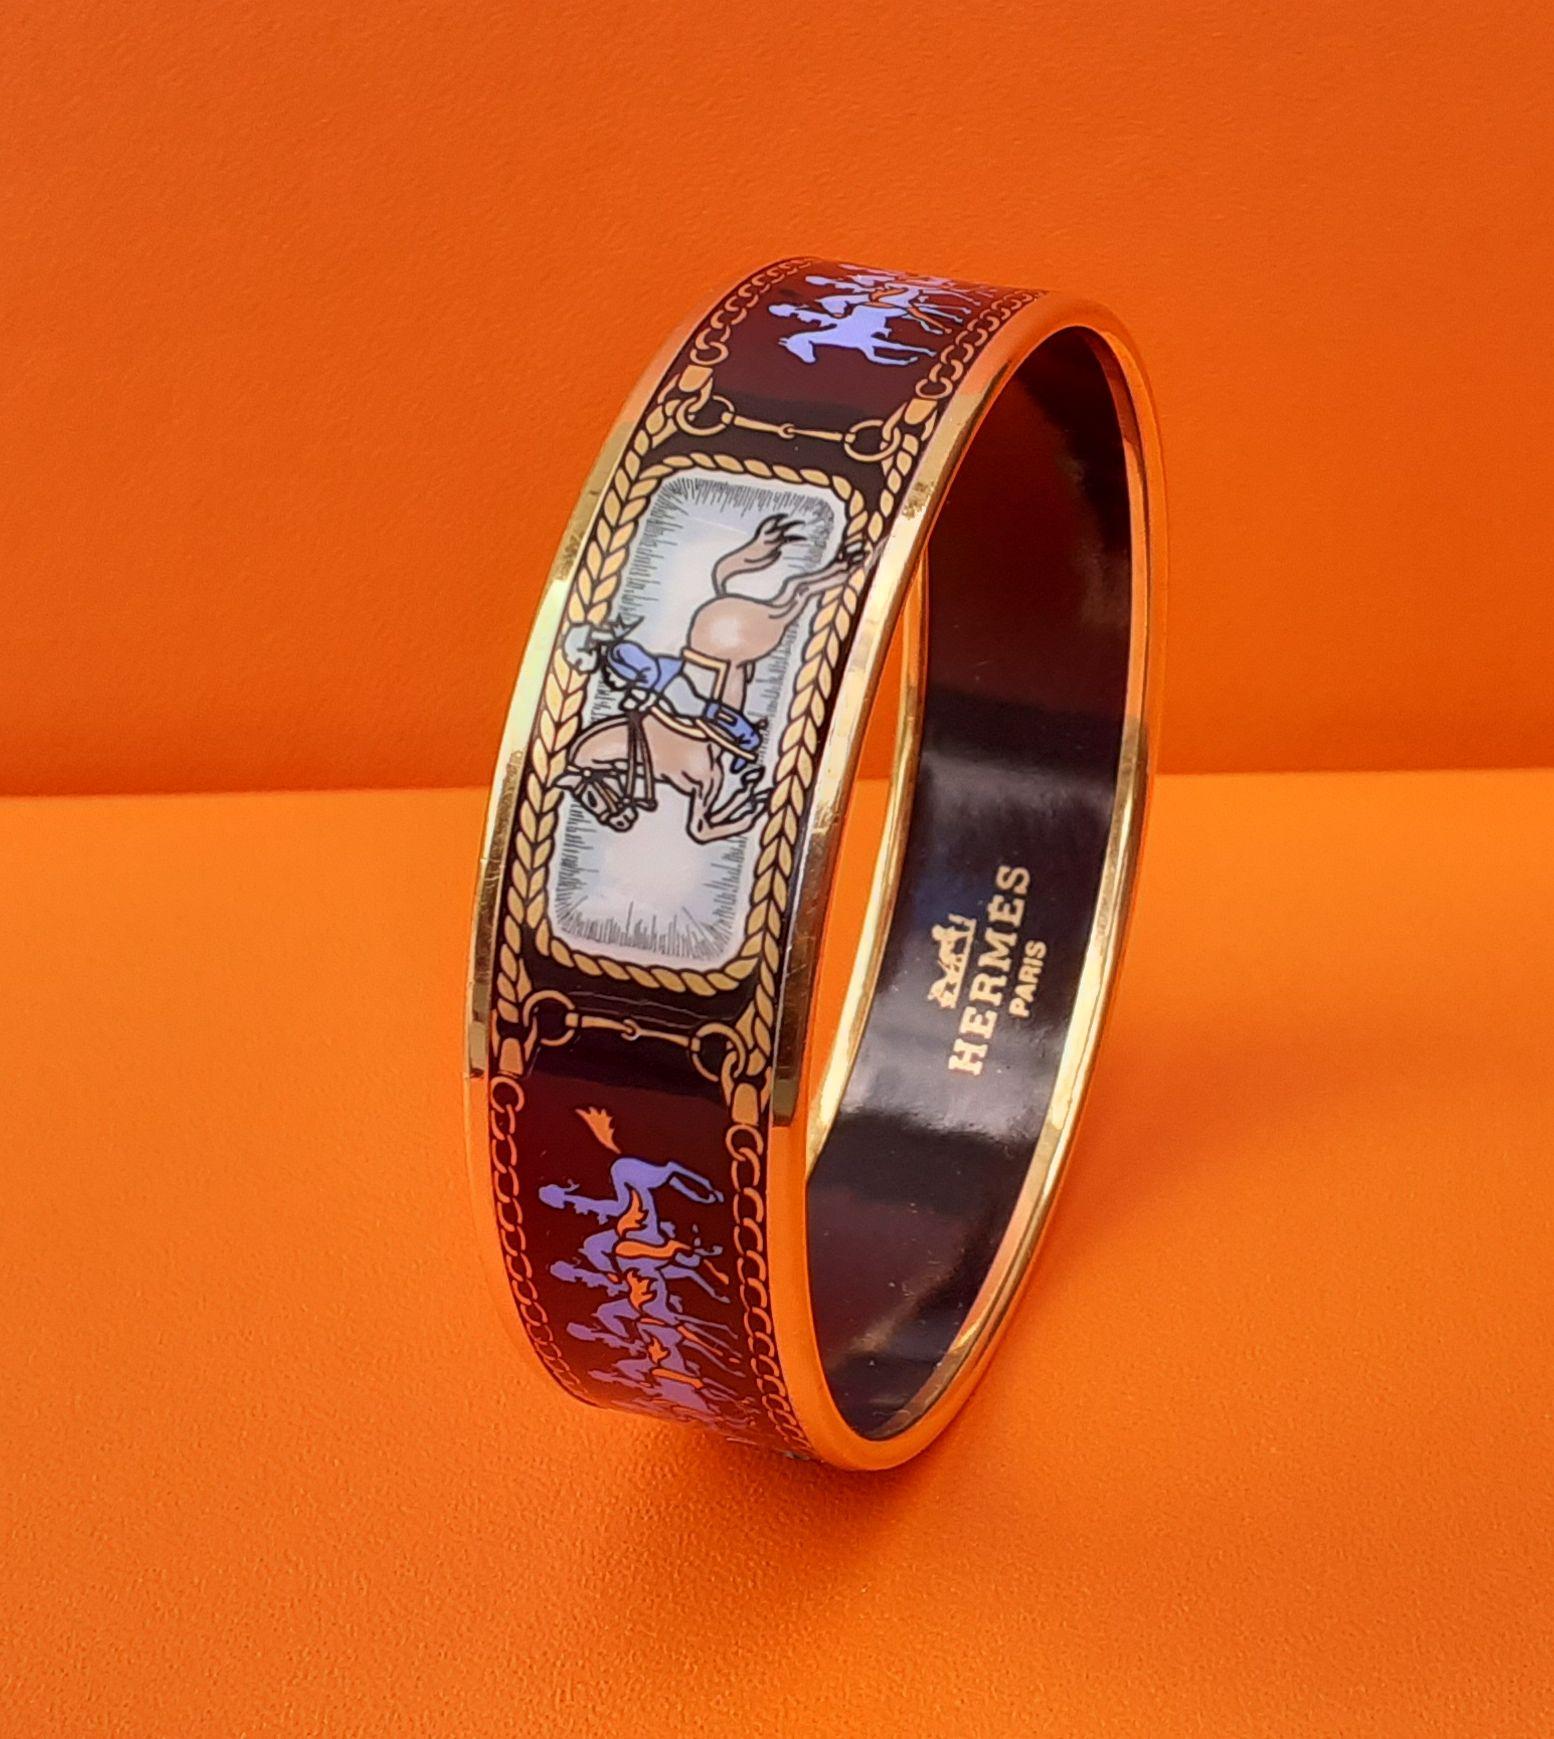 Beautiful and RARE Authentic Hermès Bracelet

Pattern: Horses and Riders

Made in Austria

Made of enamel printed and gold plated hardware

Colorways: Black, Blue, White

The hind legs and the tails of the horses are golden, which brings very